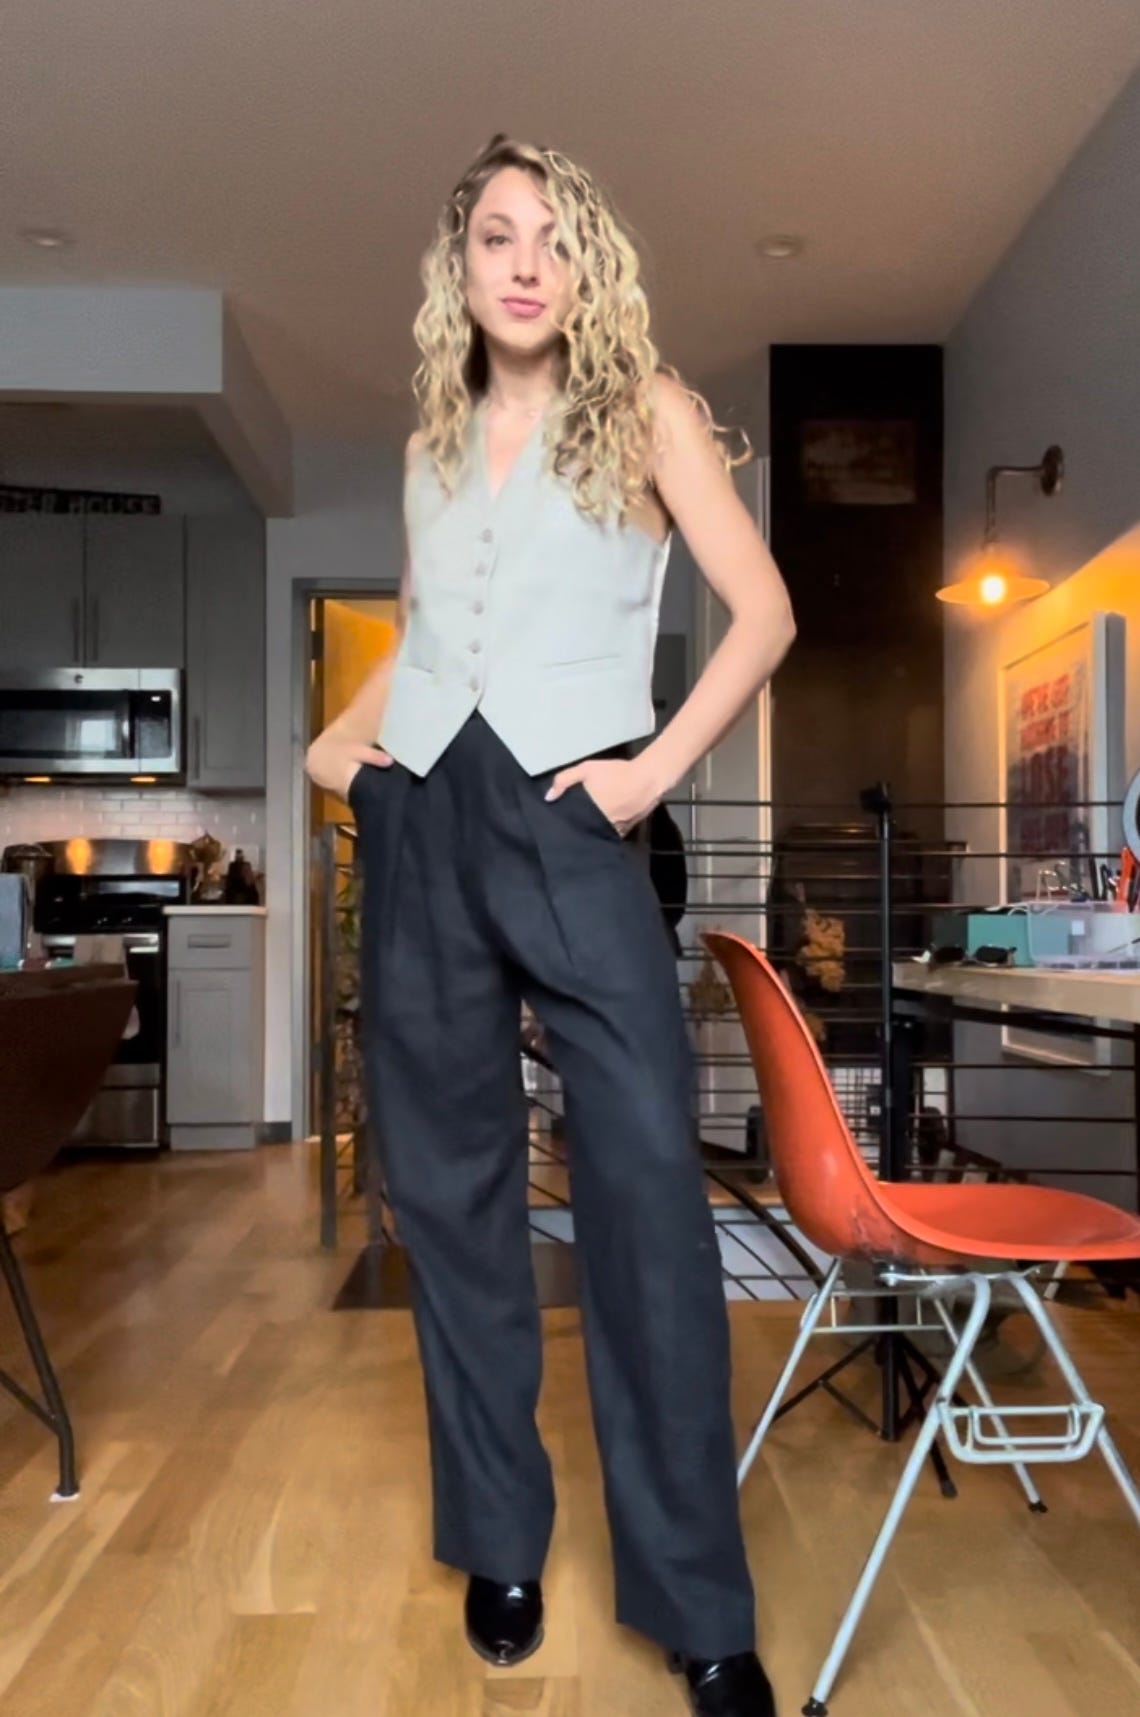 Alyssa is standing in an apartment wearing black pants and a beige vest.